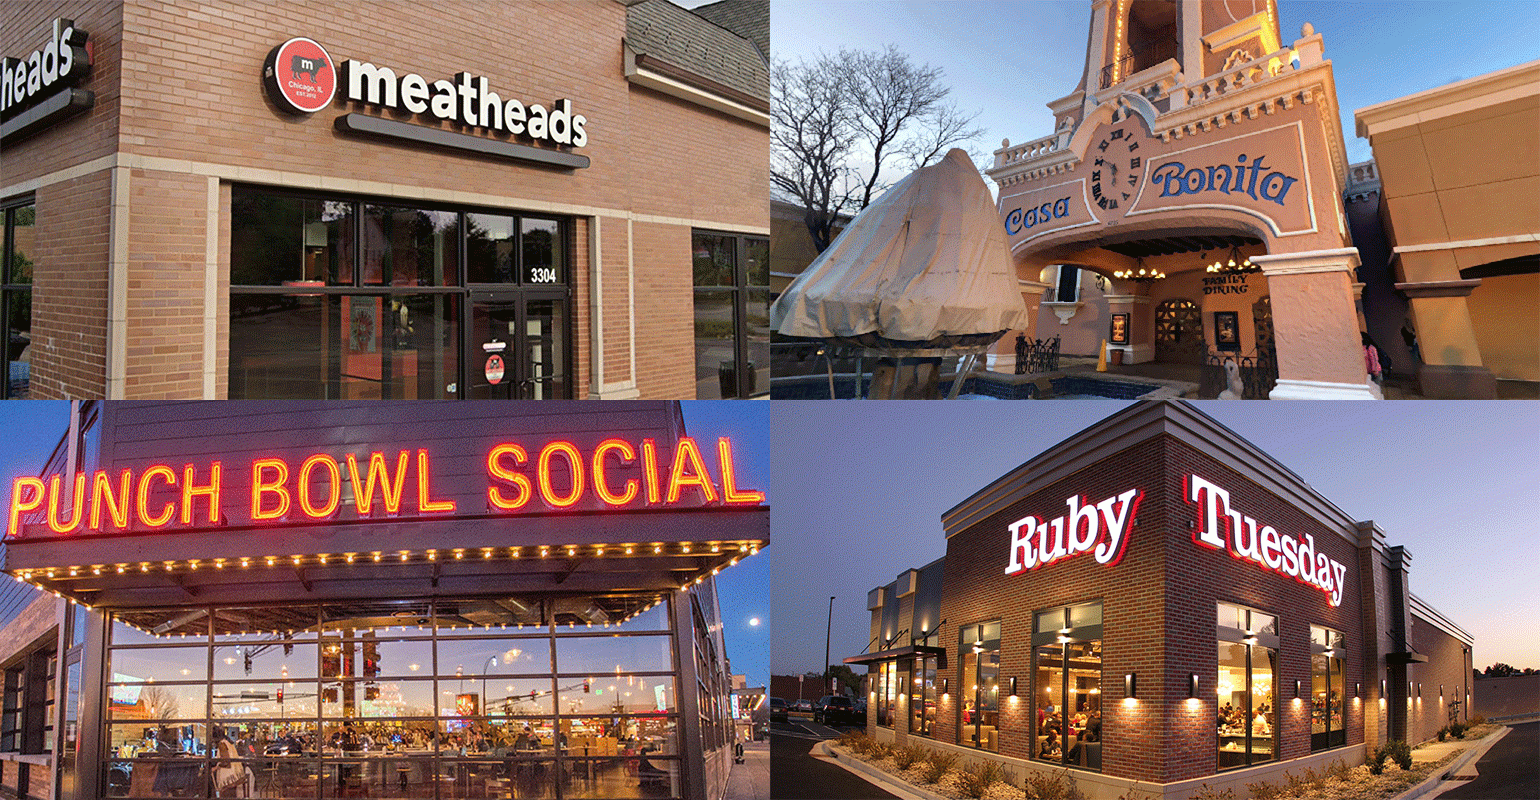 Big Restaurant Chain Considers Bankruptcy: How the Pandemic Pushed a Beloved Brand to the Brink